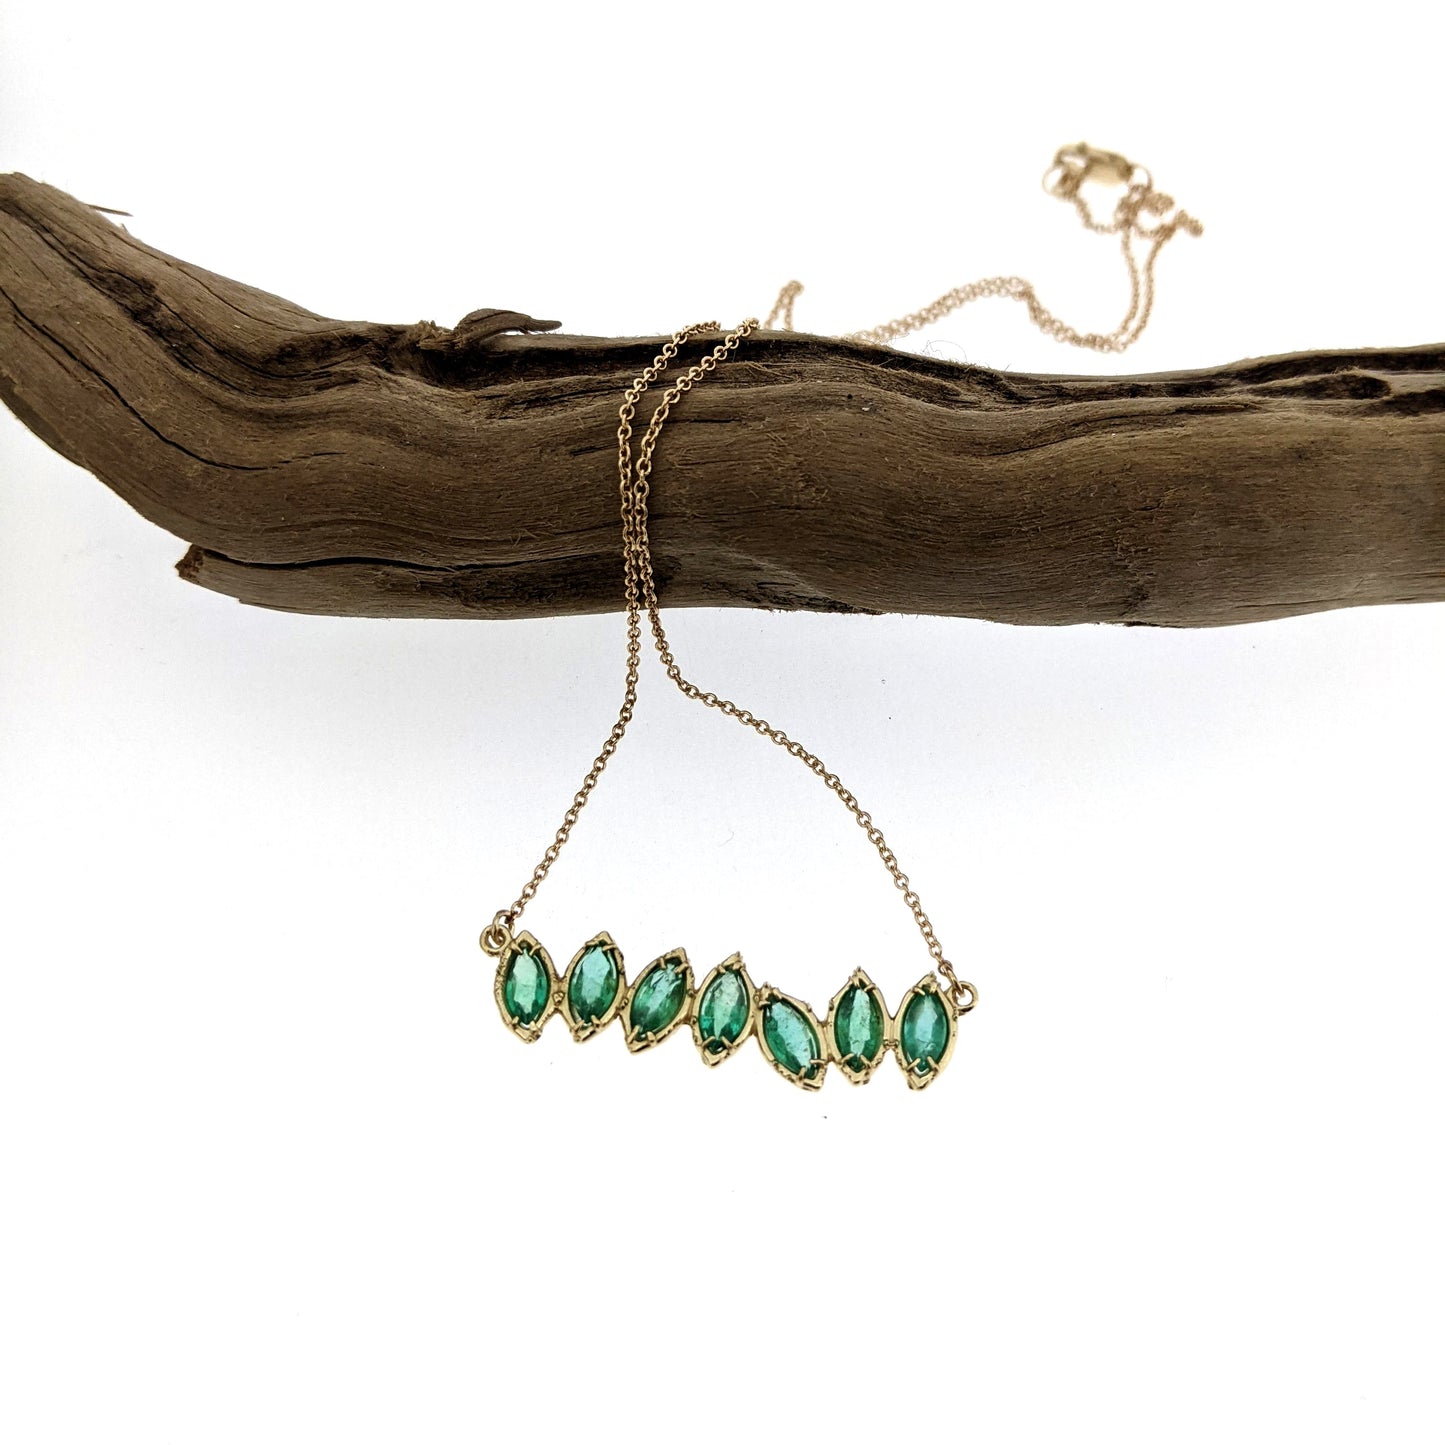 Full view of Emerald Cherin Necklace hanging from branch.